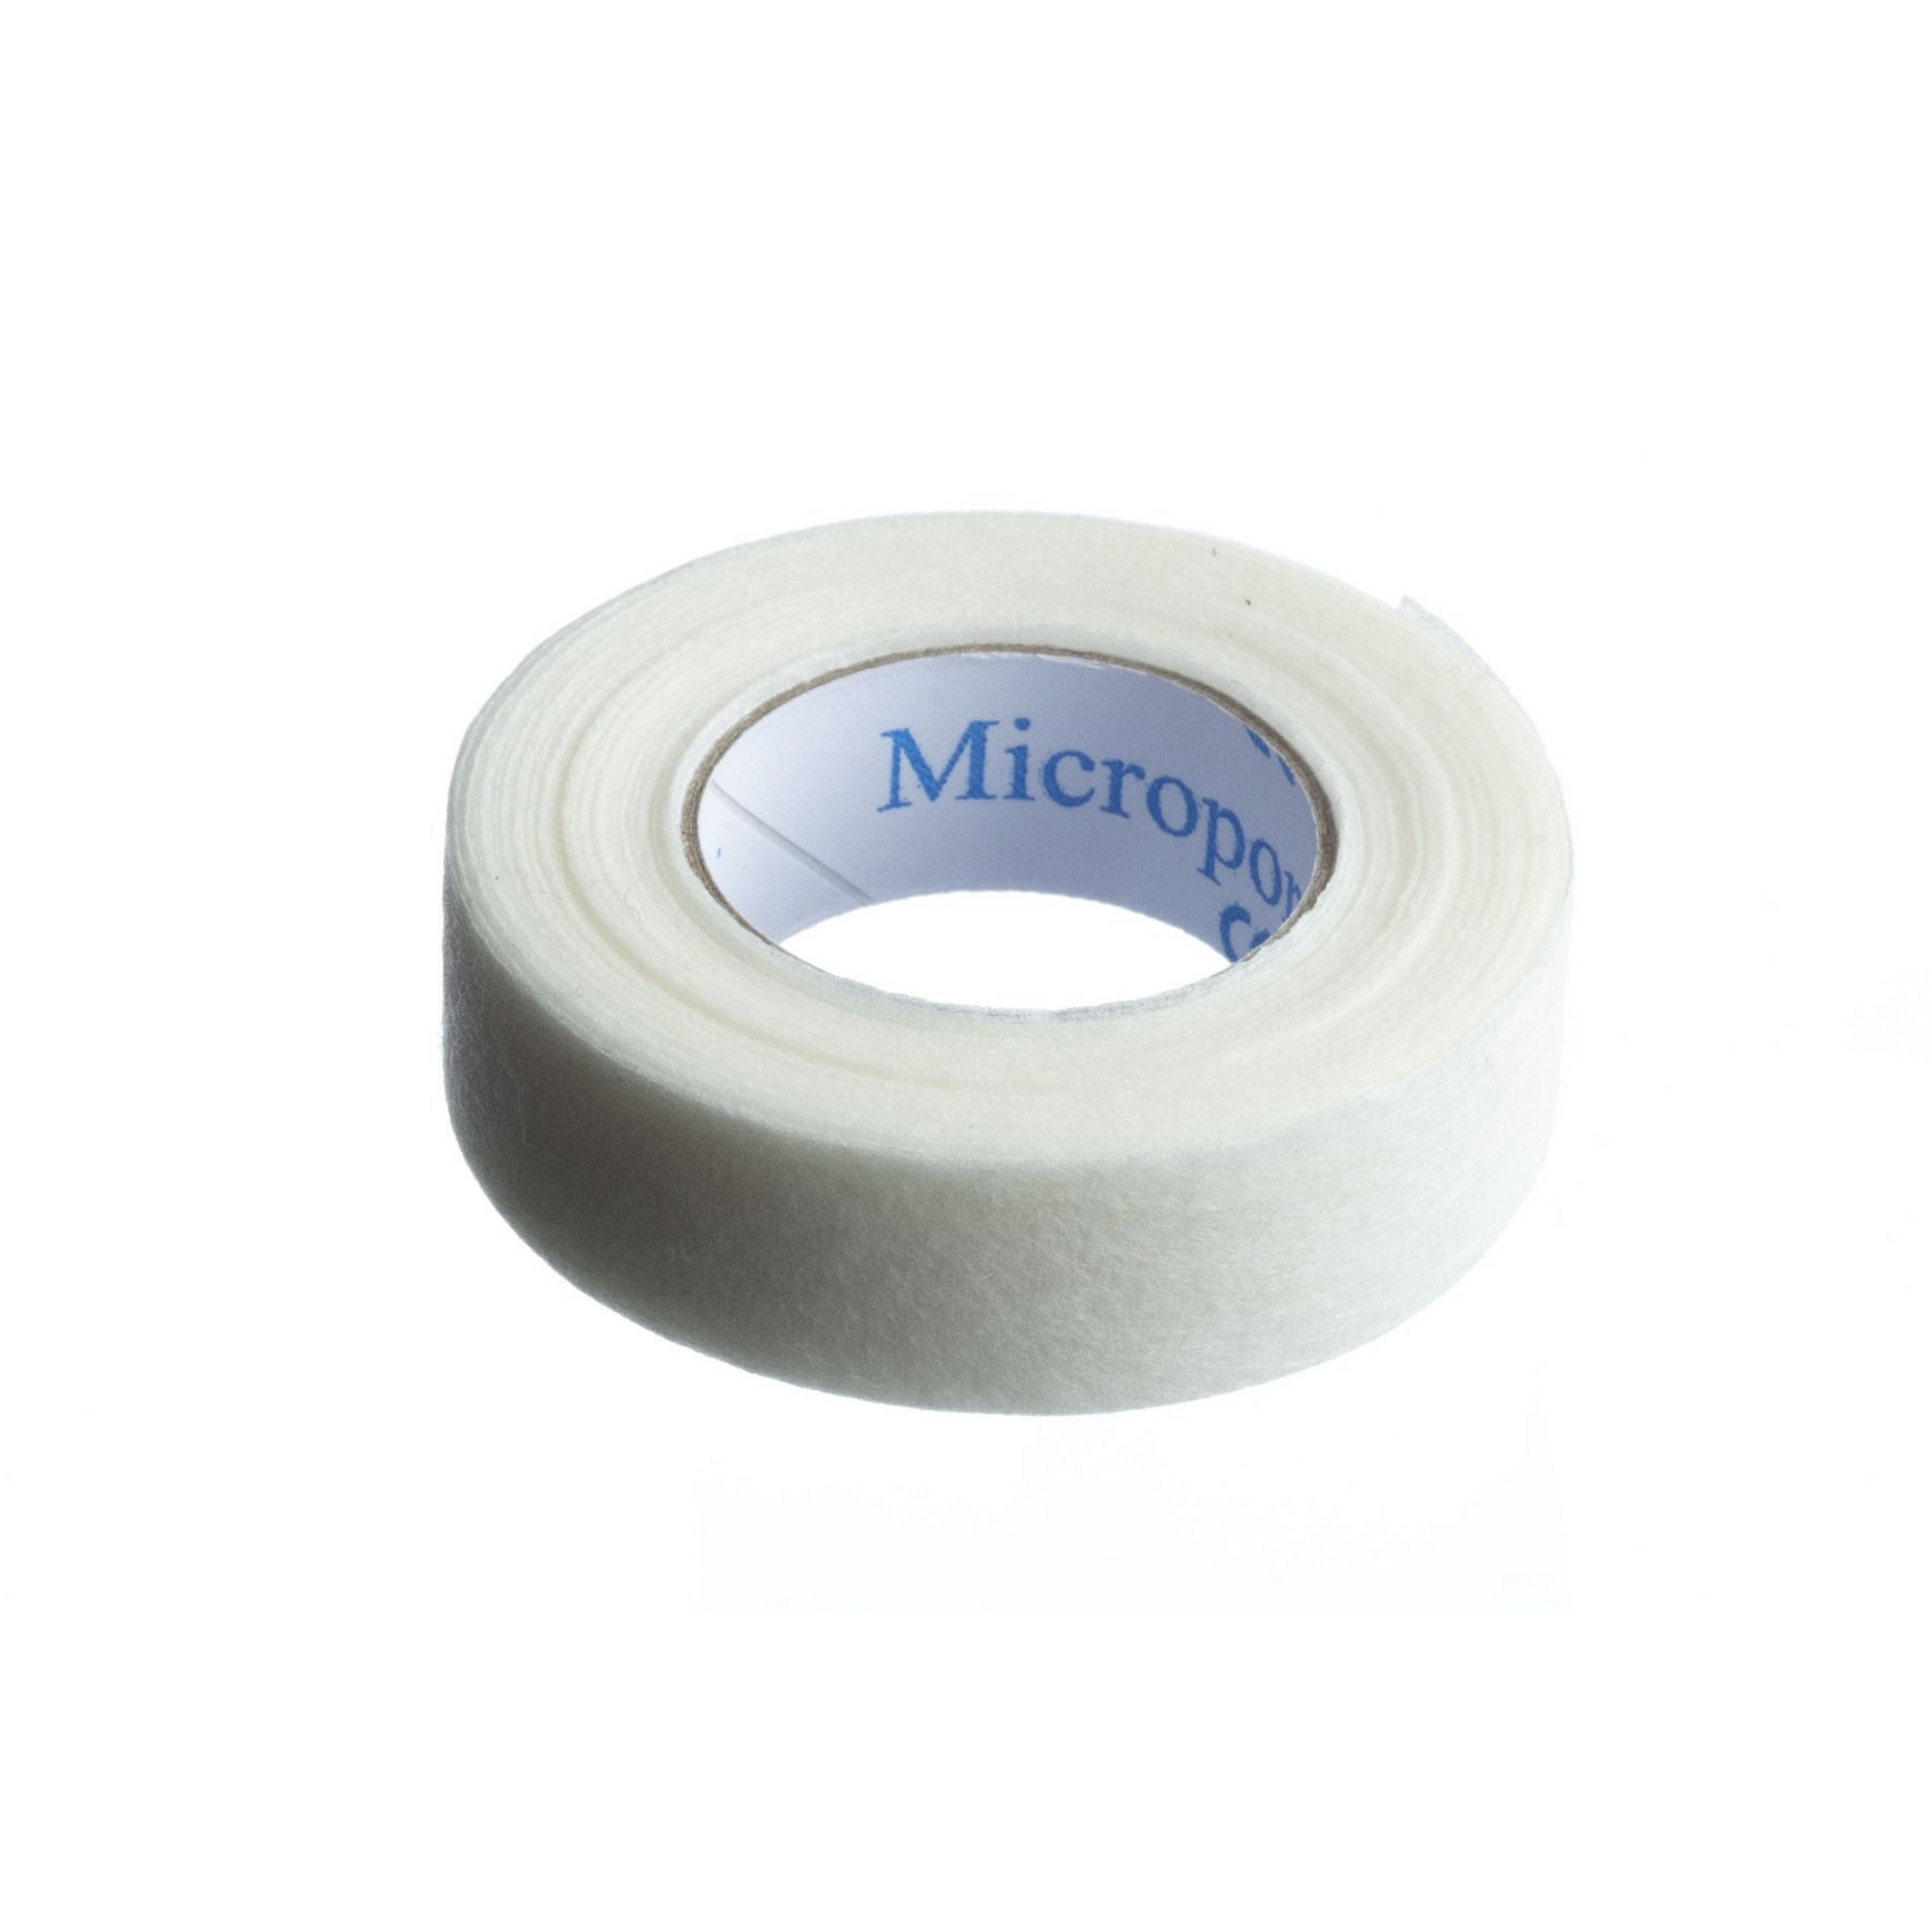 3M Micropore Tape – Ruthie Belle